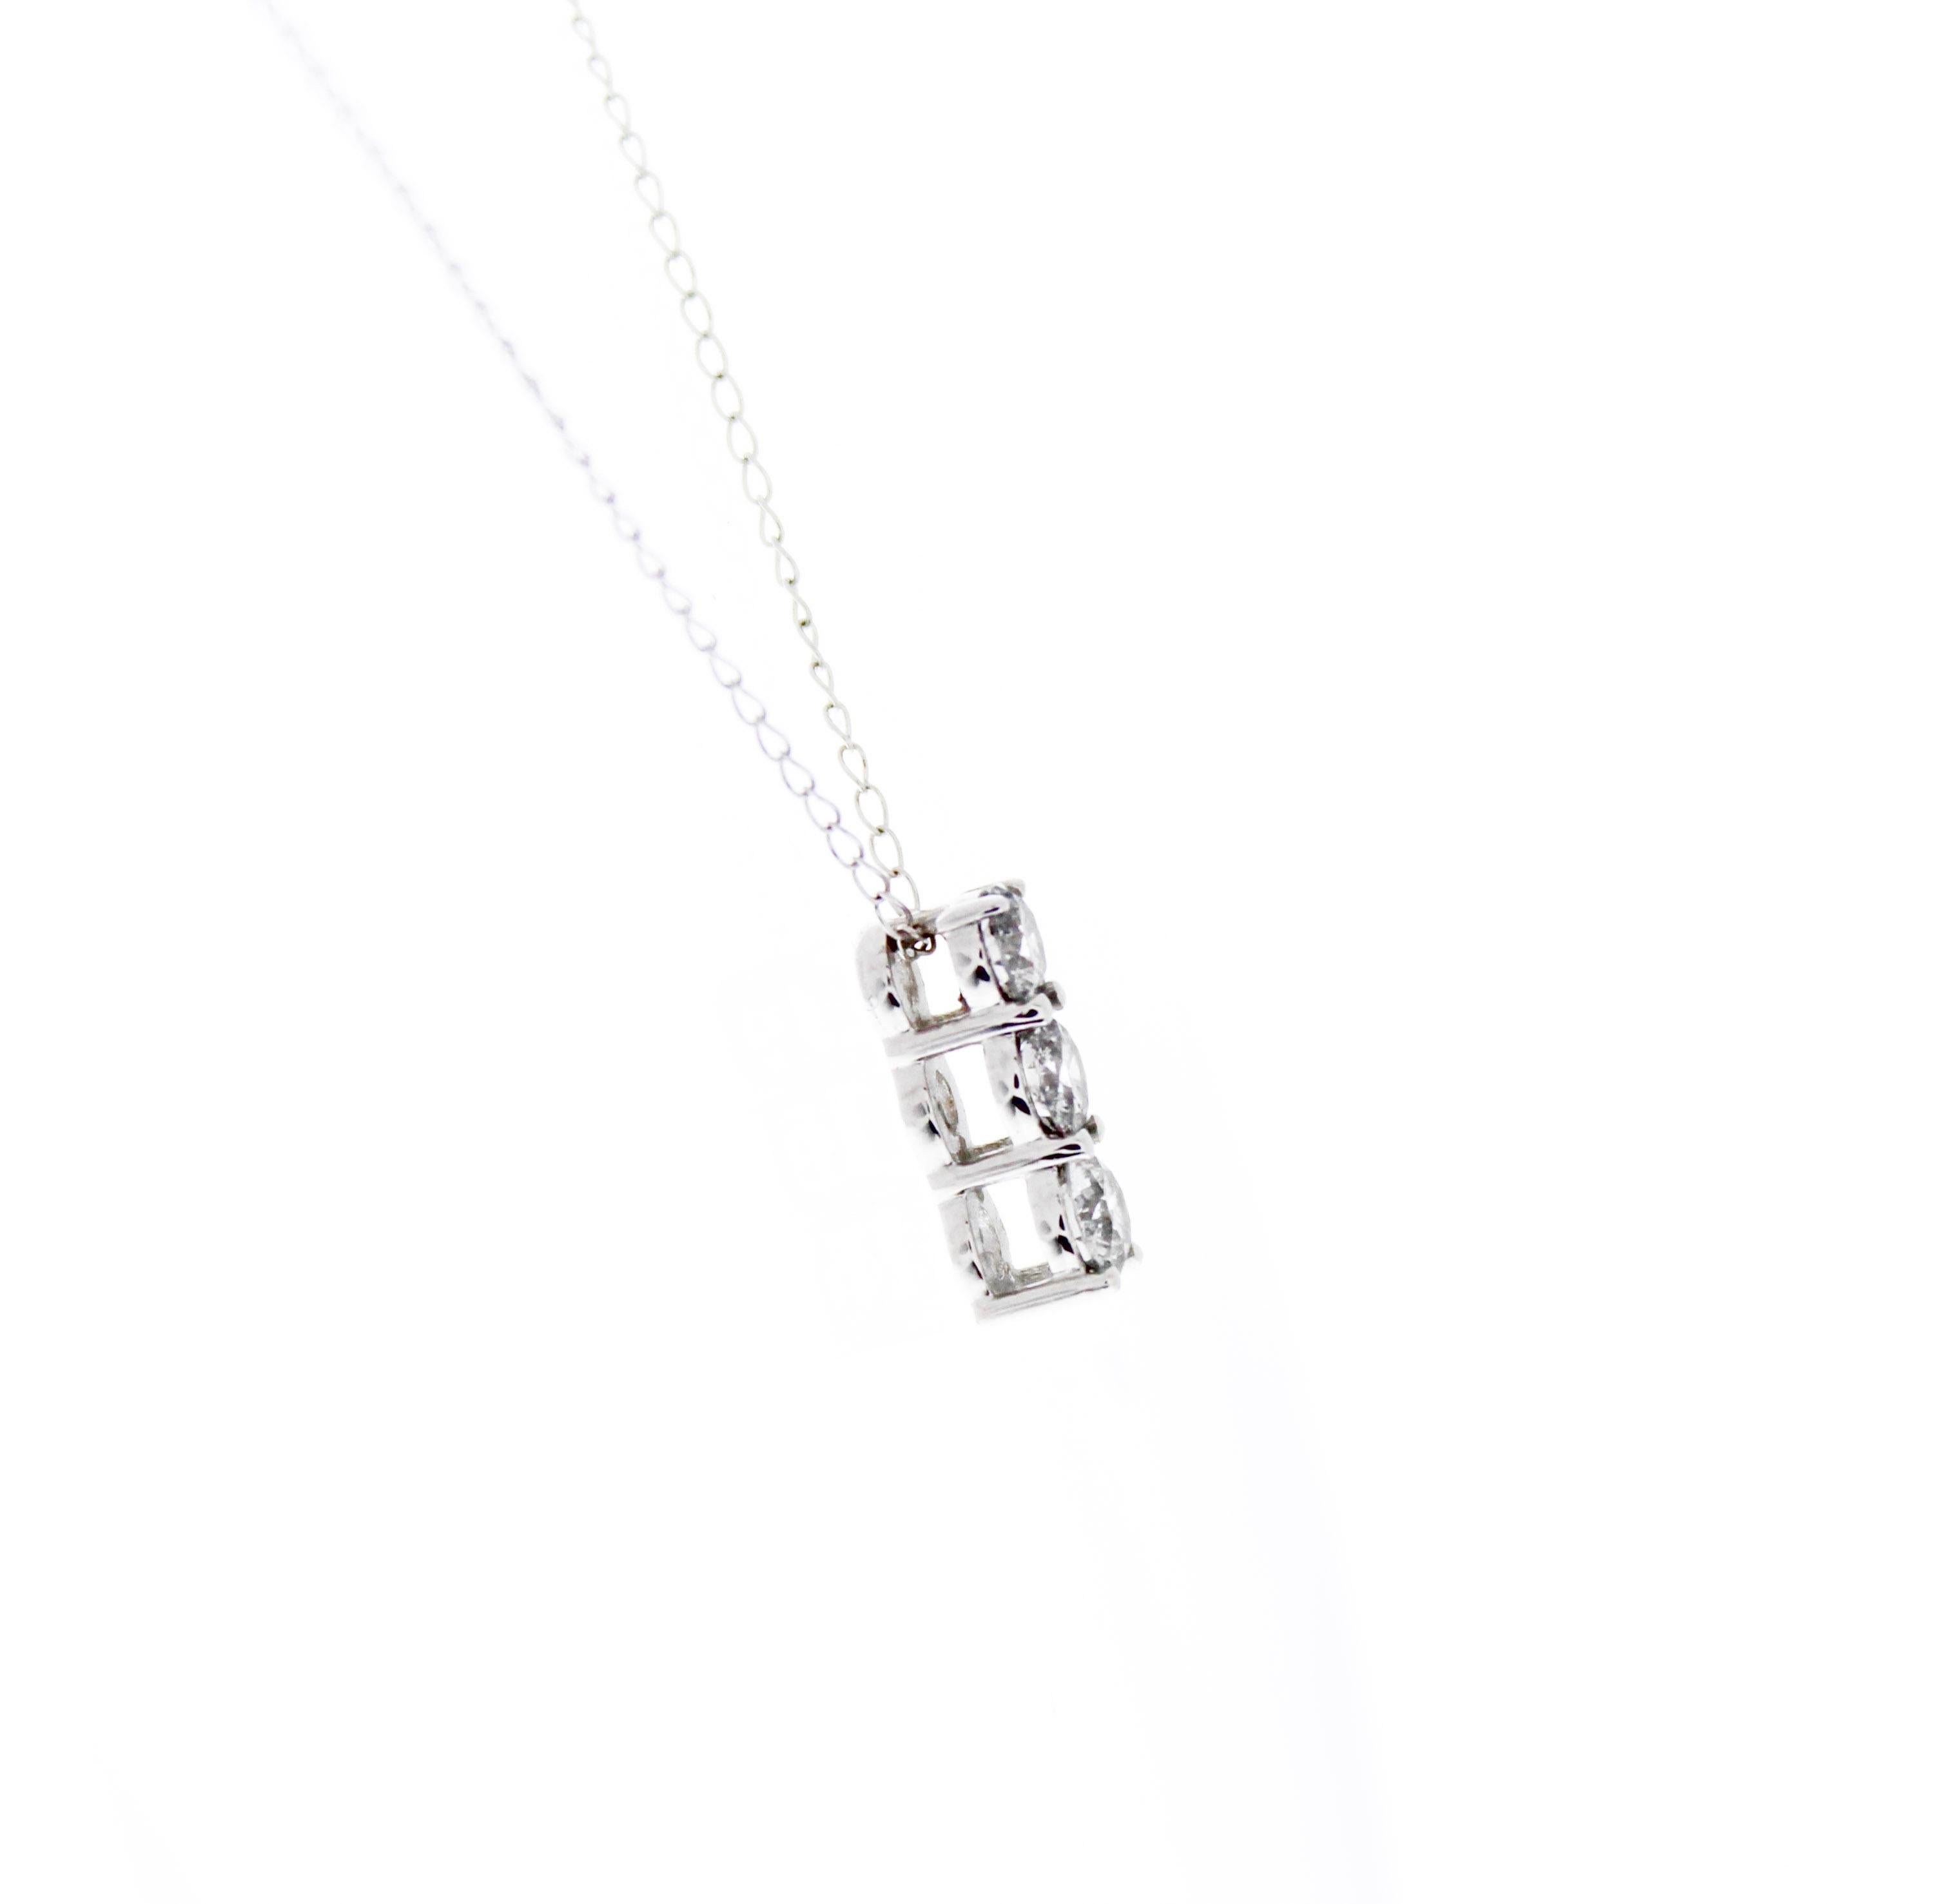 This impressive three-stone round diamond pendant is finely crafted in brightly polished 14 karat white gold and features three stones totaling a carat weight of 0.75CTW. These diamonds are SI clarity. Ideal as an anniversary or birthday present,